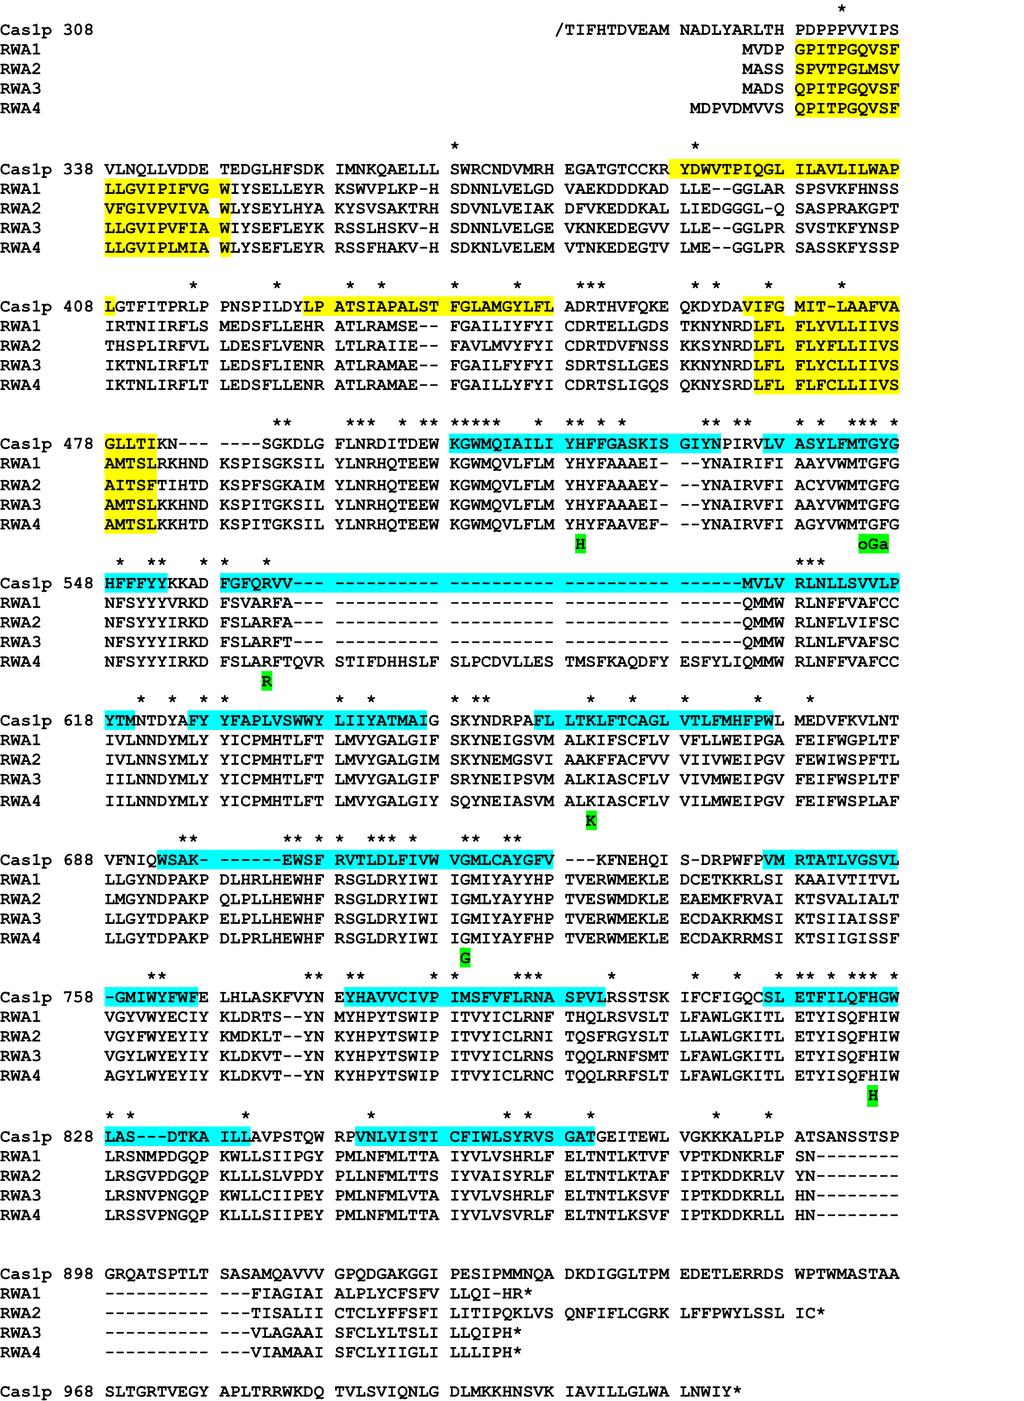 Supplemental Figure S6. Multiple sequence alignment of Arabidopsis RWA proteins and the C-terminal domain of C. neoformans Cas1p.